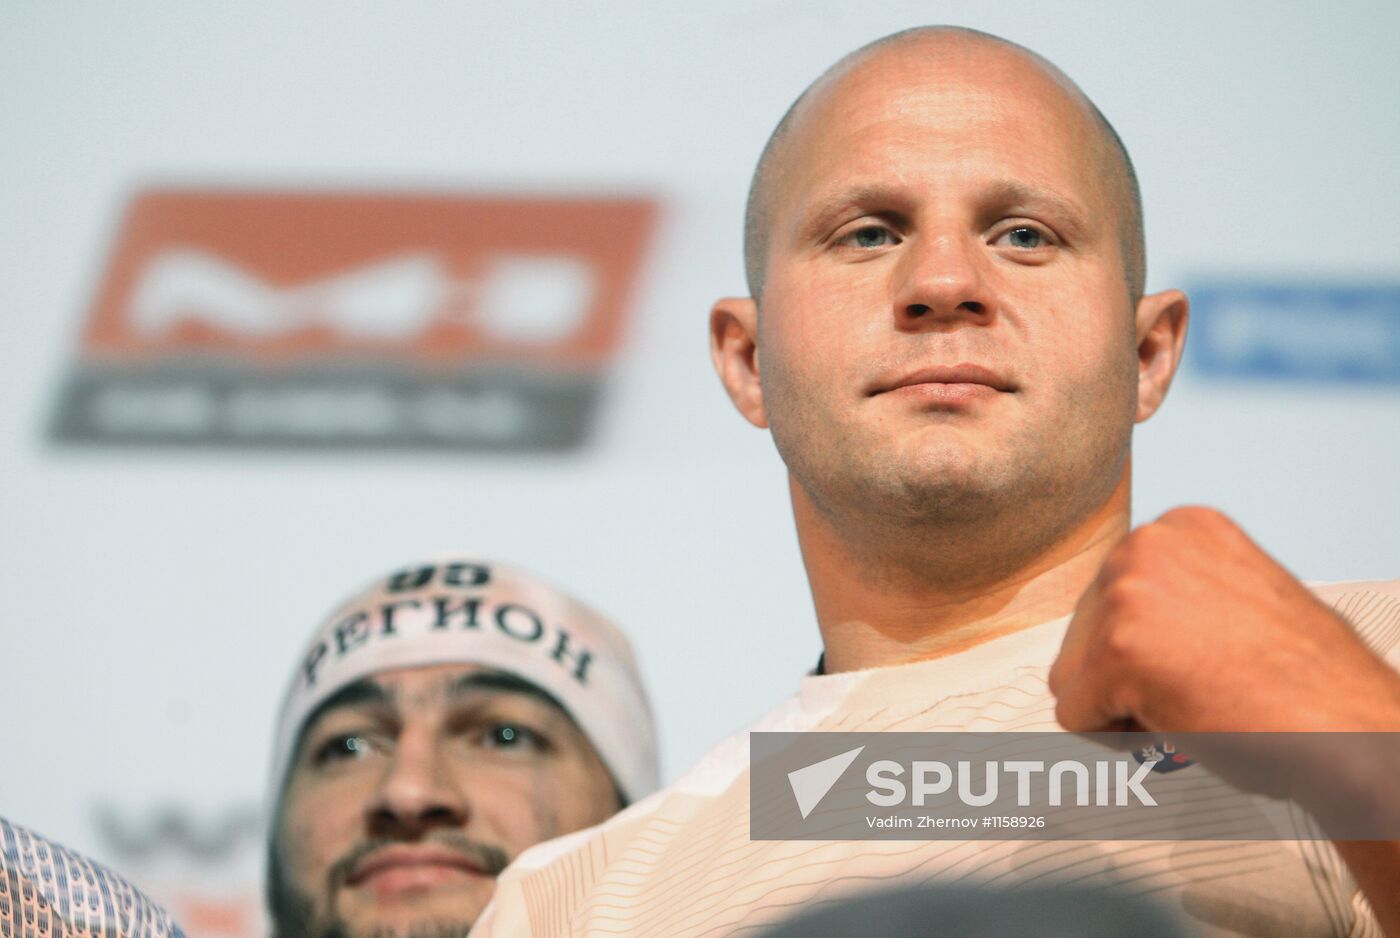 Official weigh-in of Fedor Emeliyanenko and Pedro Rizzo